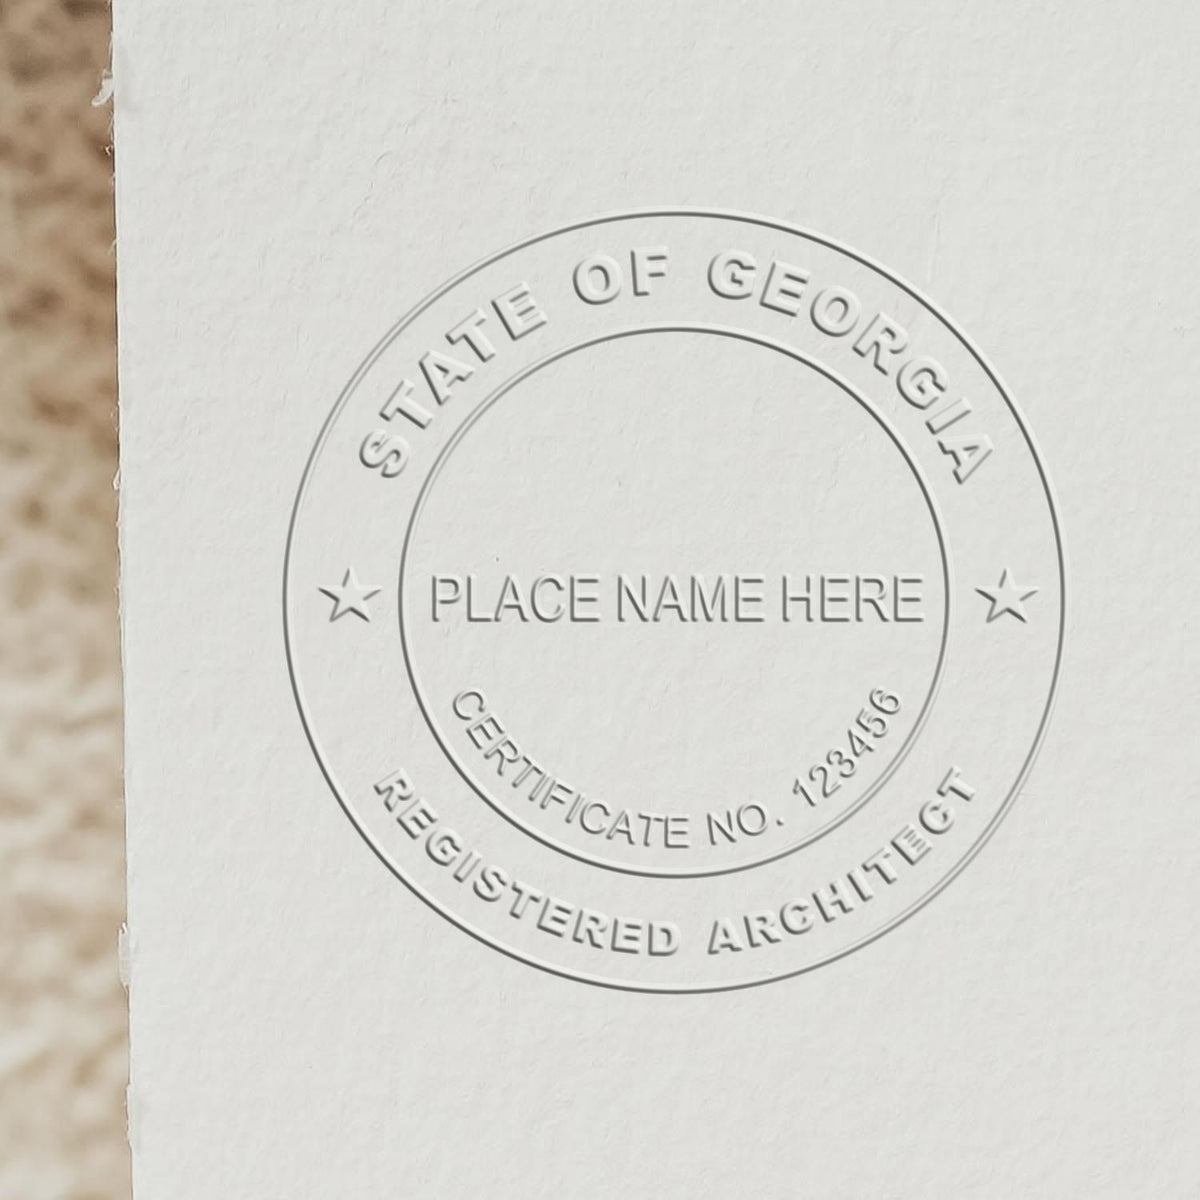 Another Example of a stamped impression of the Heavy Duty Cast Iron Georgia Architect Embosser on a piece of office paper.